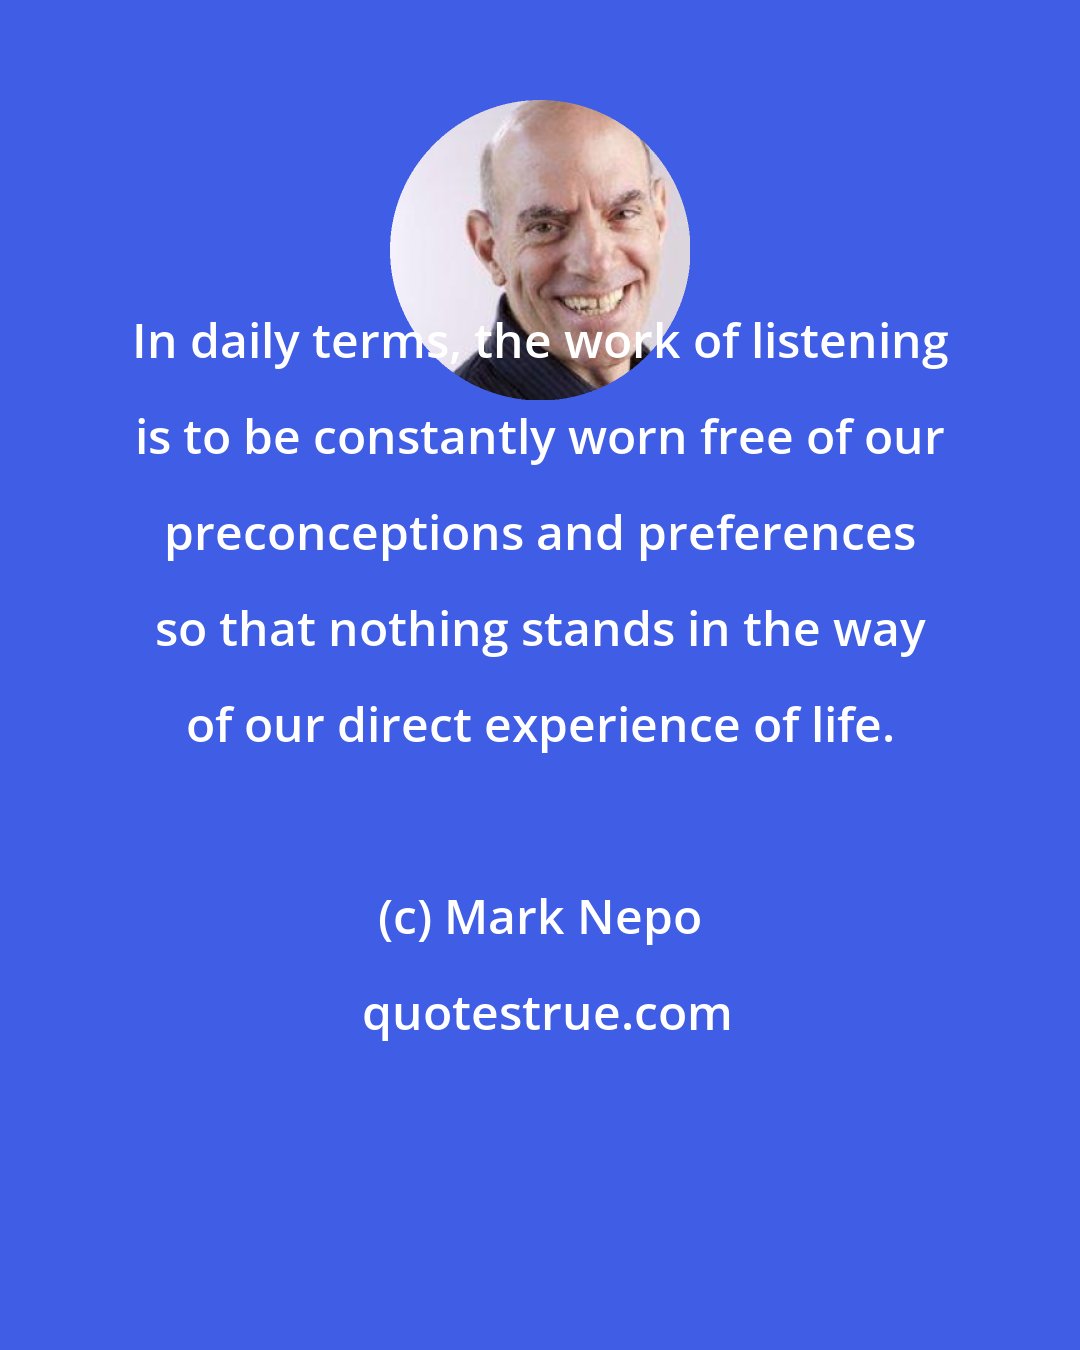 Mark Nepo: In daily terms, the work of listening is to be constantly worn free of our preconceptions and preferences so that nothing stands in the way of our direct experience of life.